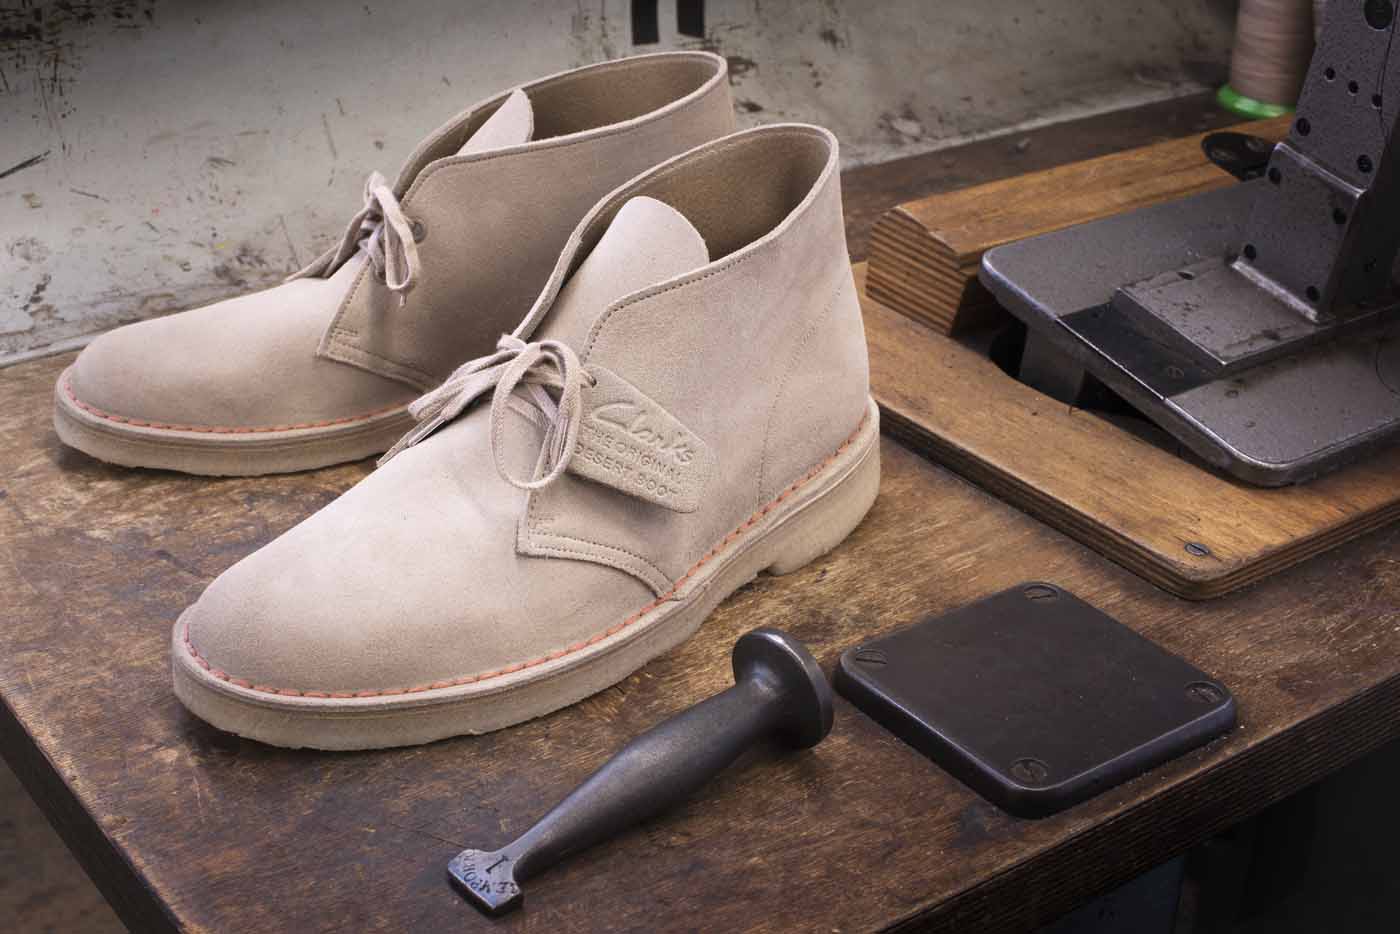 clarks shoes made in usa